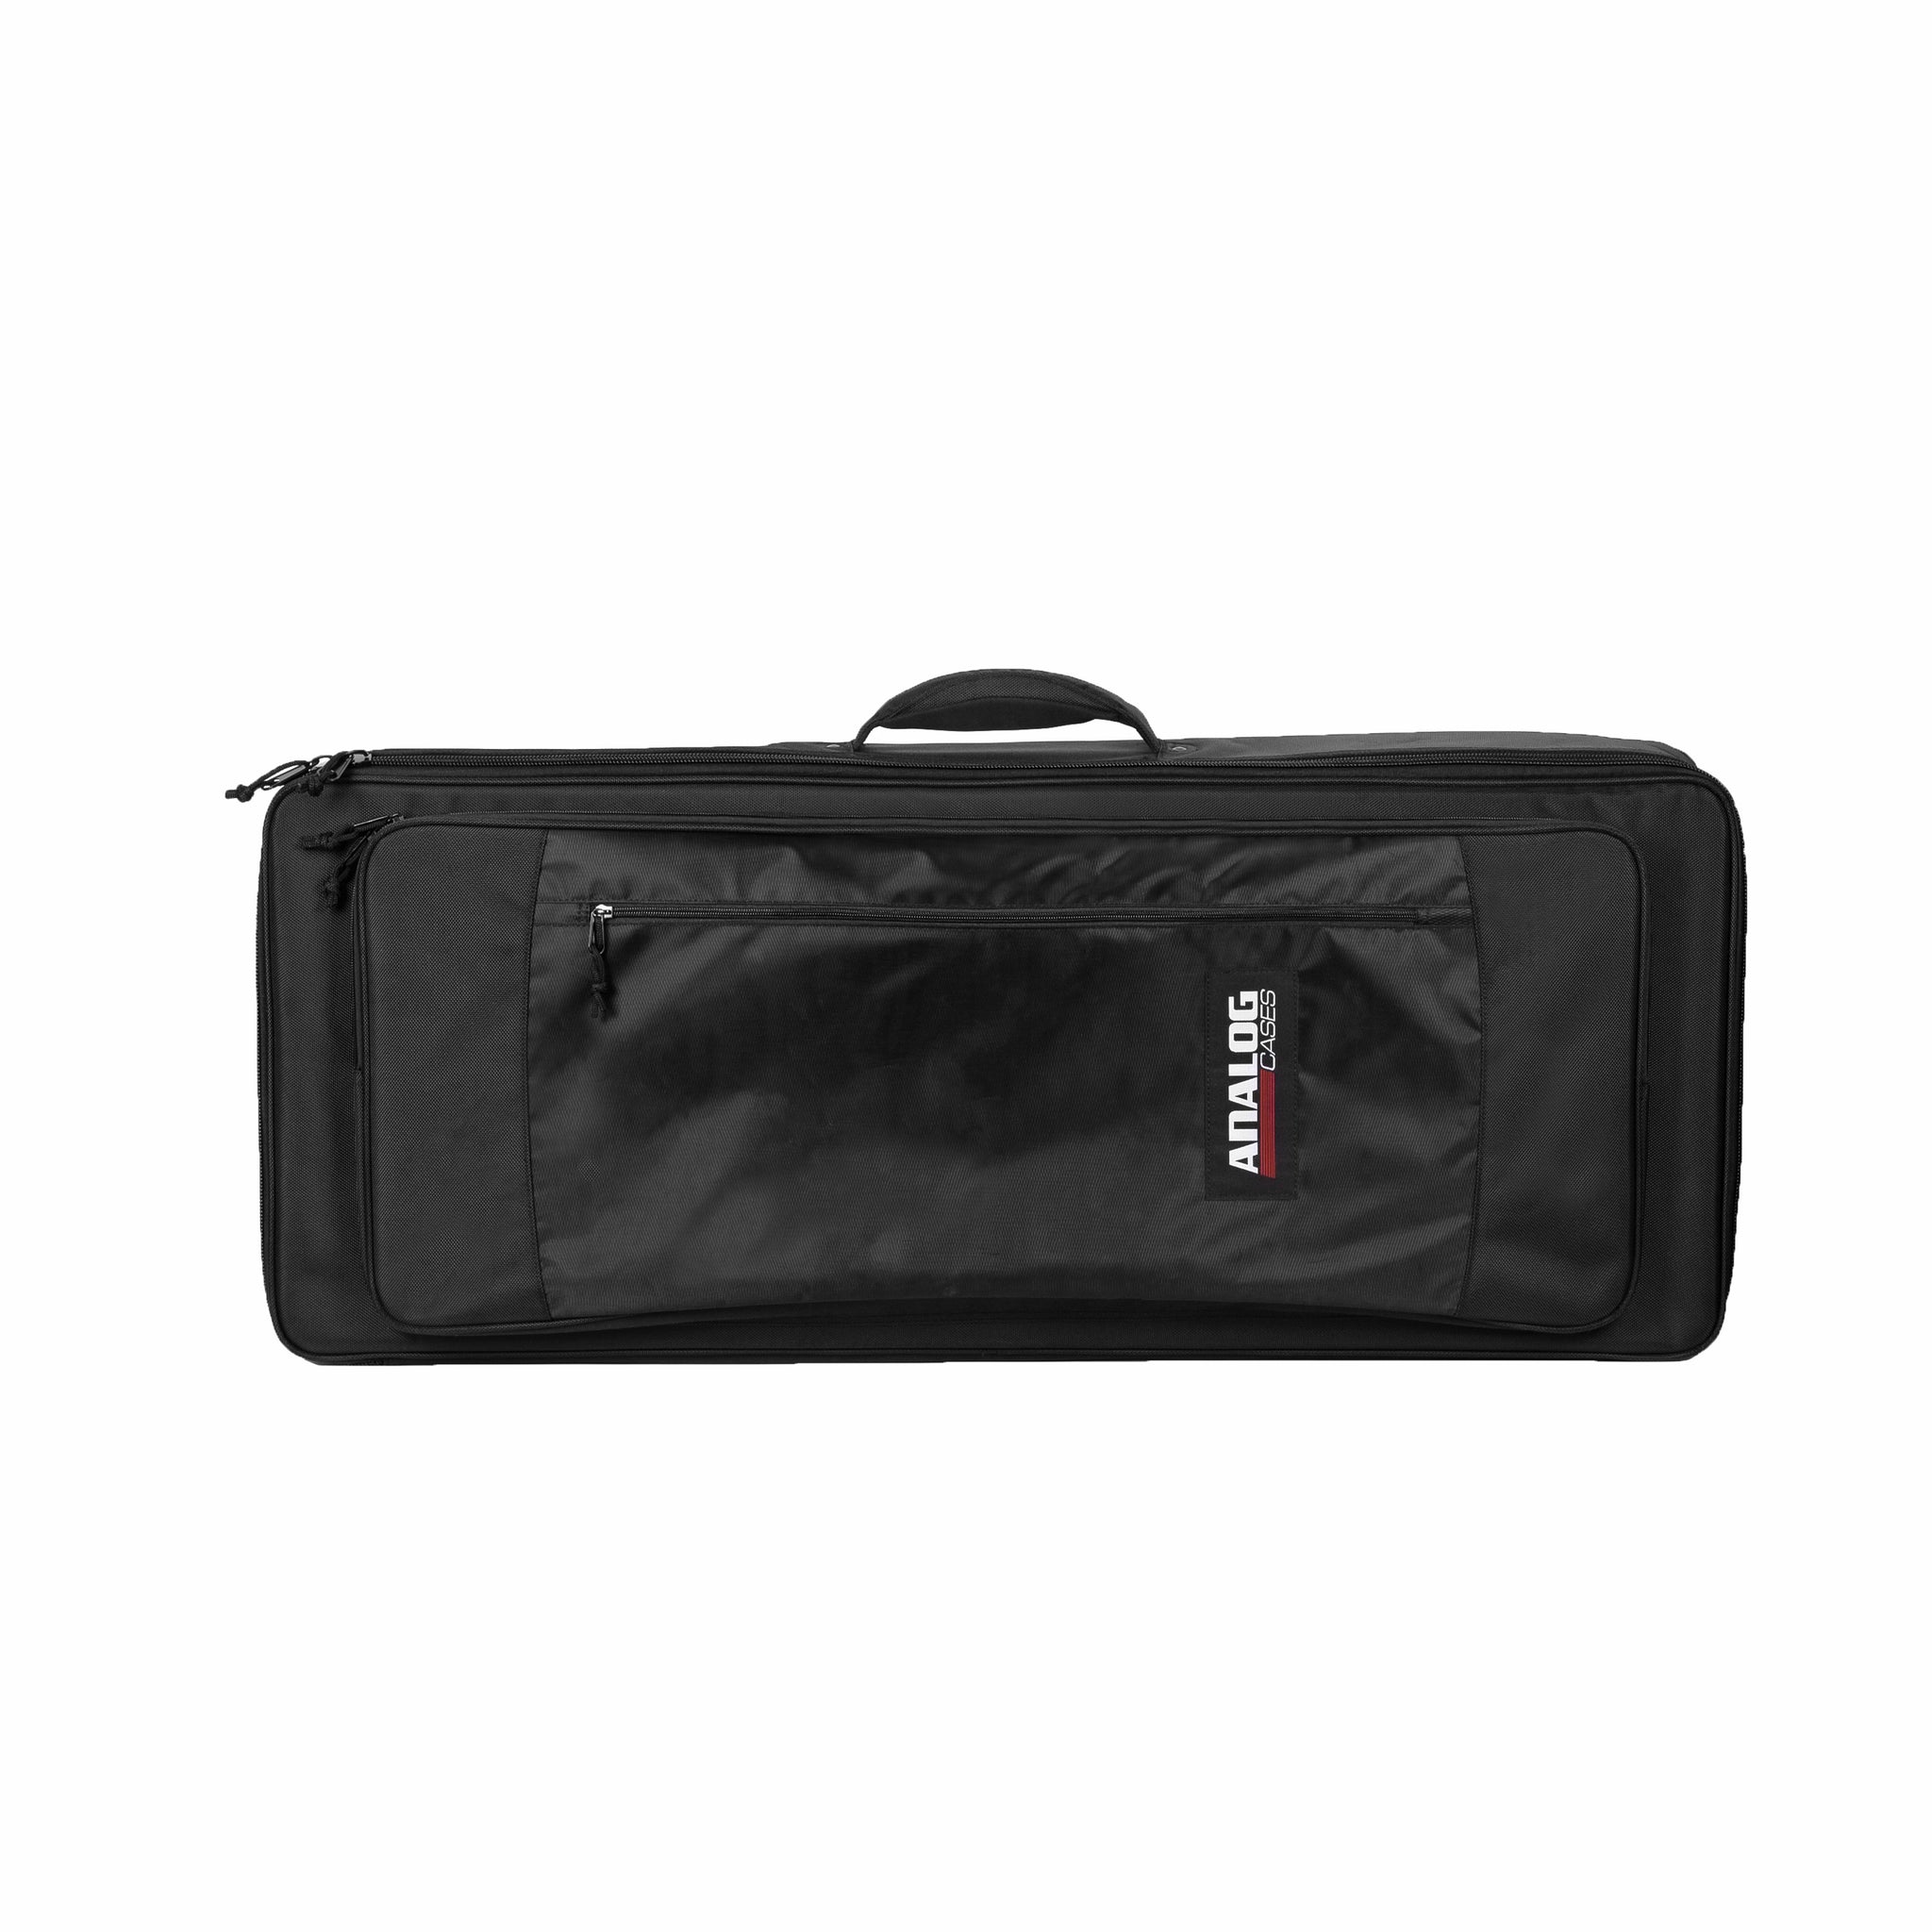 SUSTAIN Case For The Native Instruments Komplete Kontrol S49